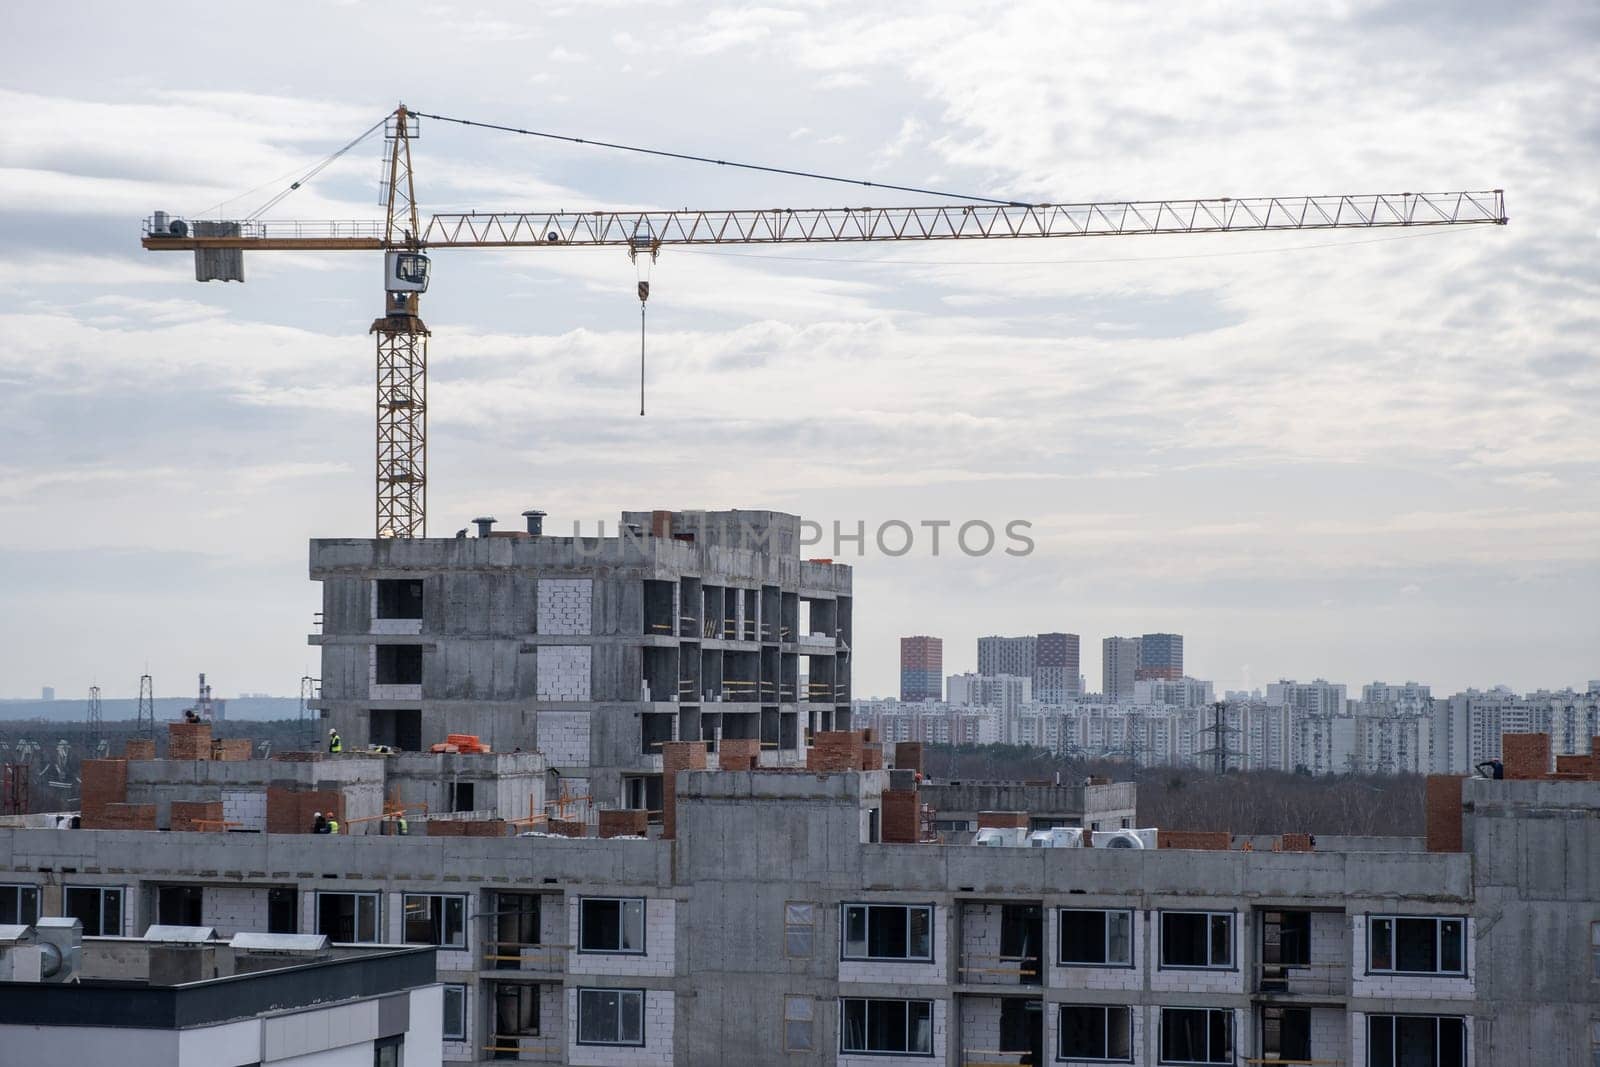 A crane and a building under construction against a blue sky background. Builders work on large construction sites, Building a house is not necessary for new high-rise buildings